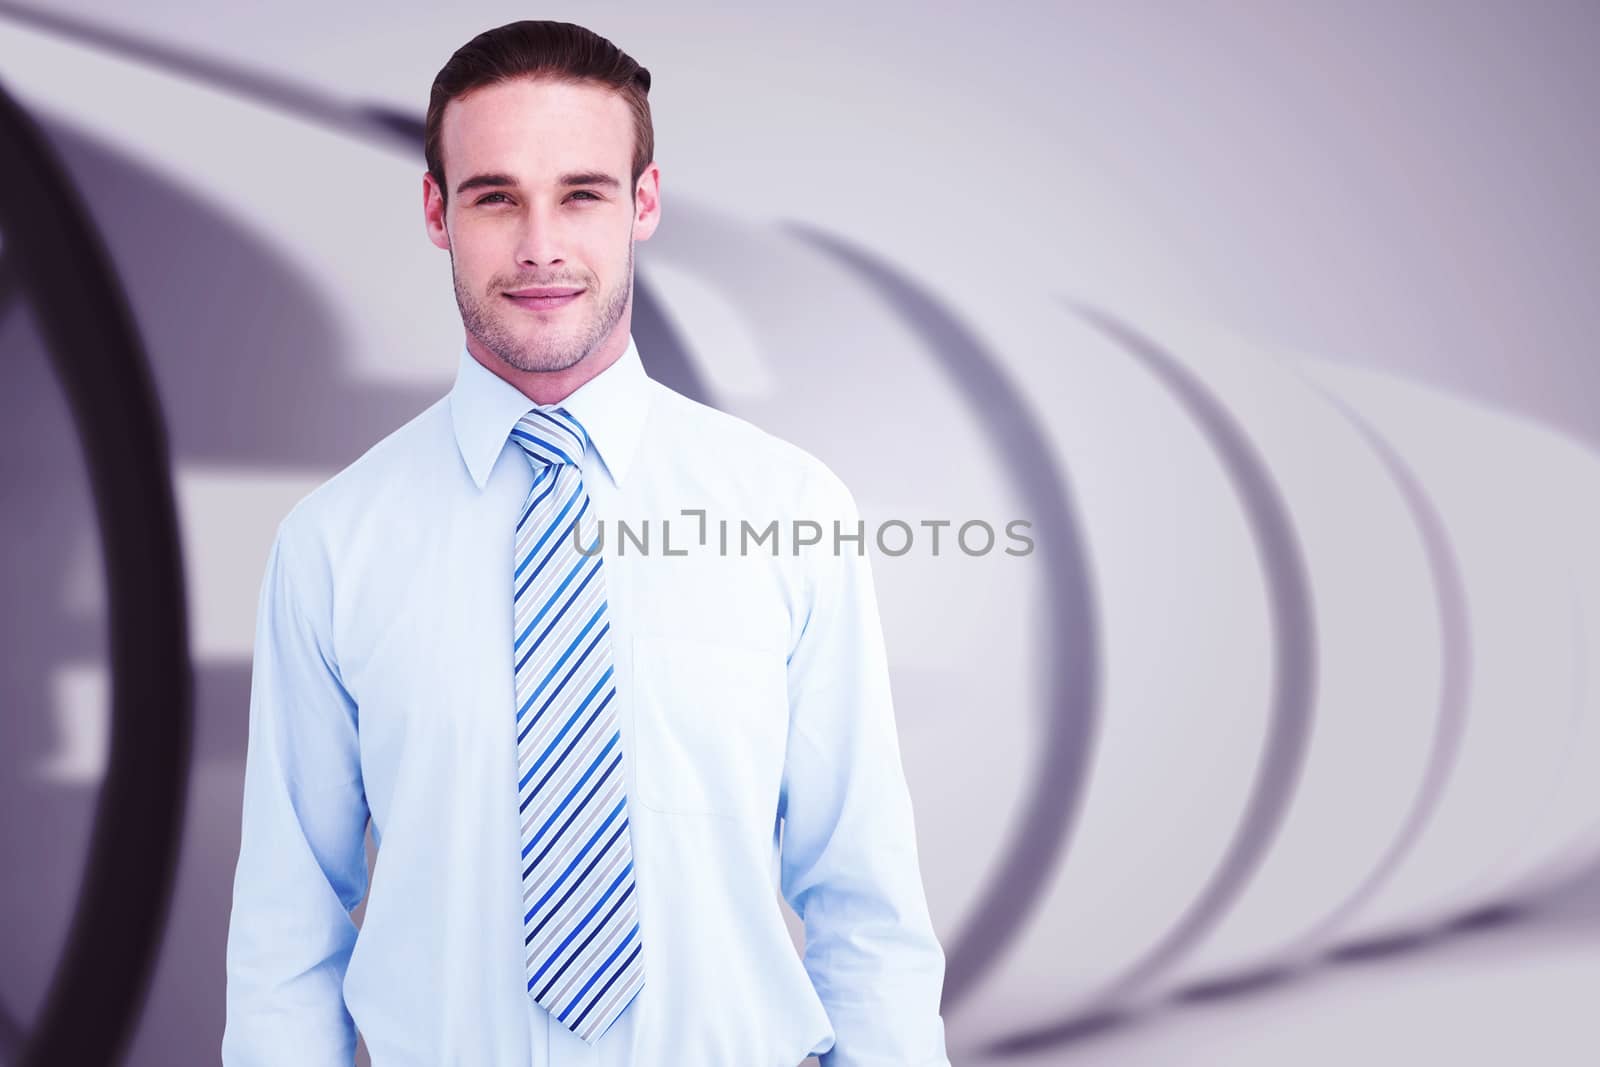 Cheerful businessman posing with hands in pockets against white abstract room